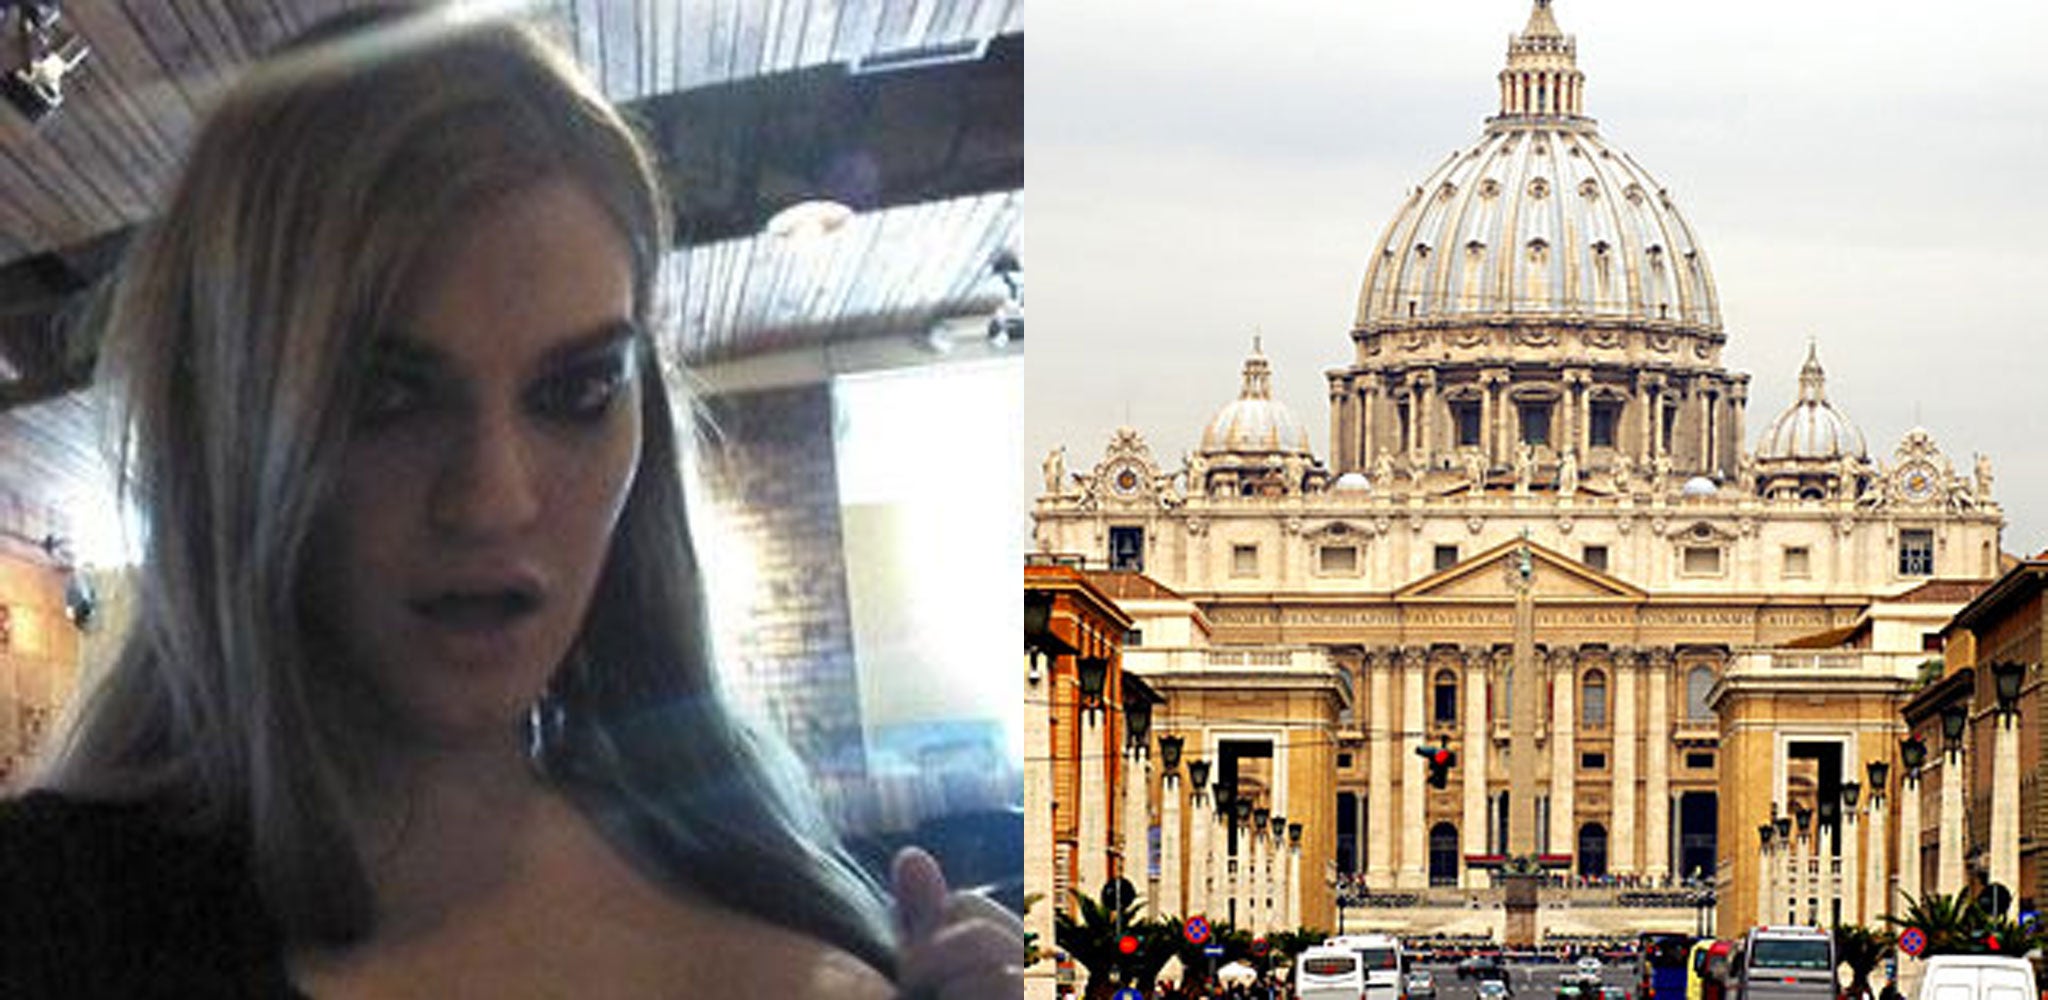 TorrentFreak.com claimed a number of films, including some starring transsexual porn star Tiffany Starr, were discovered on a list of torrents downloaded in the Vatican City